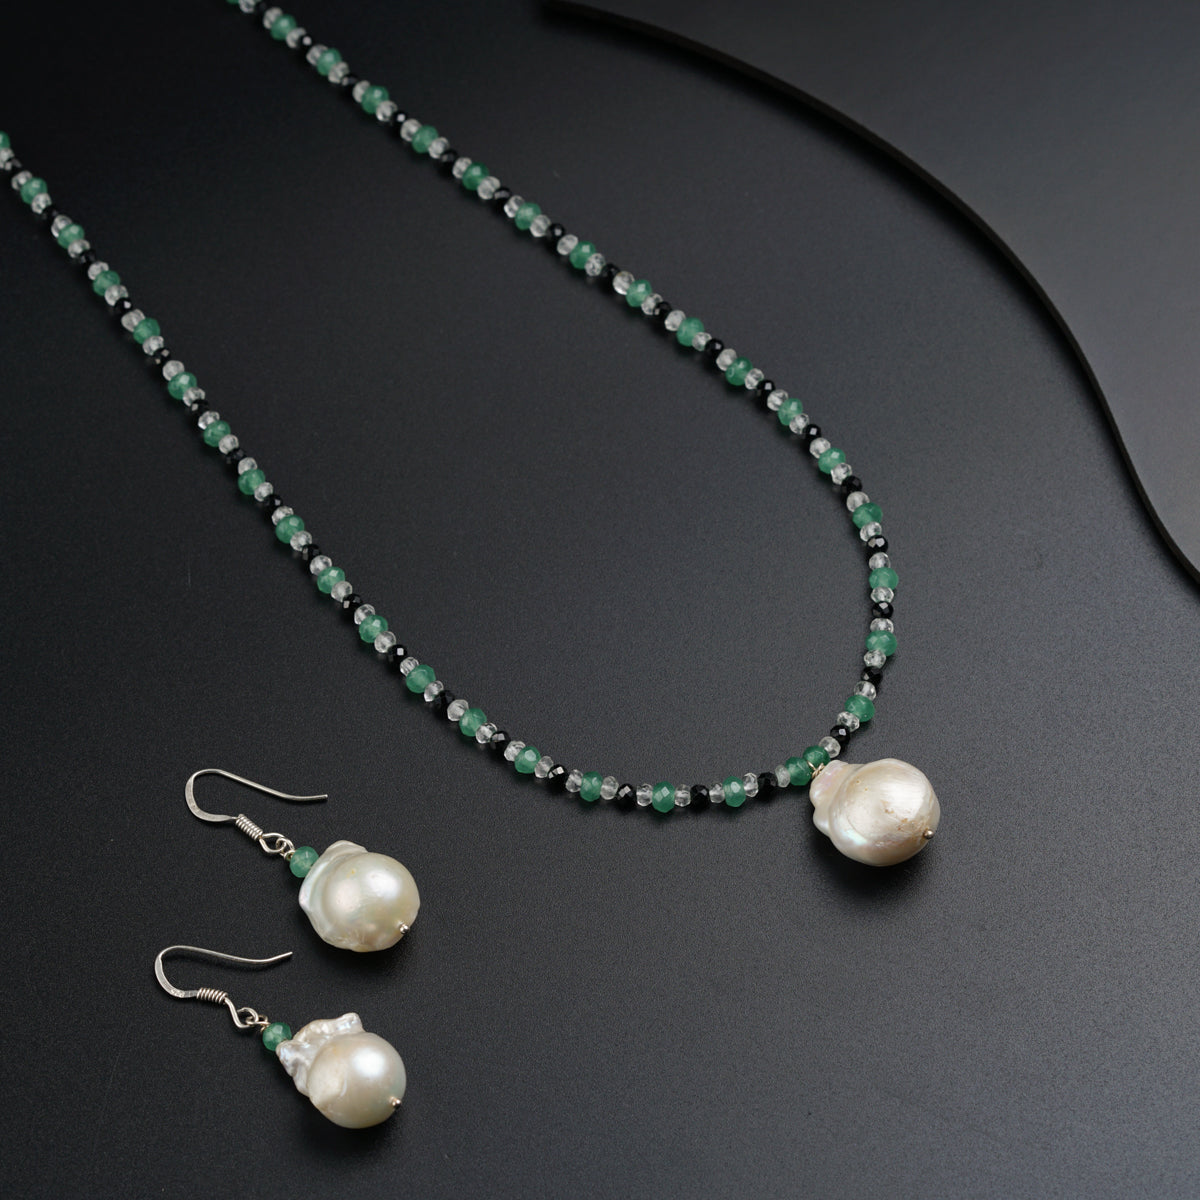 a necklace and earring set with pearls and green beads